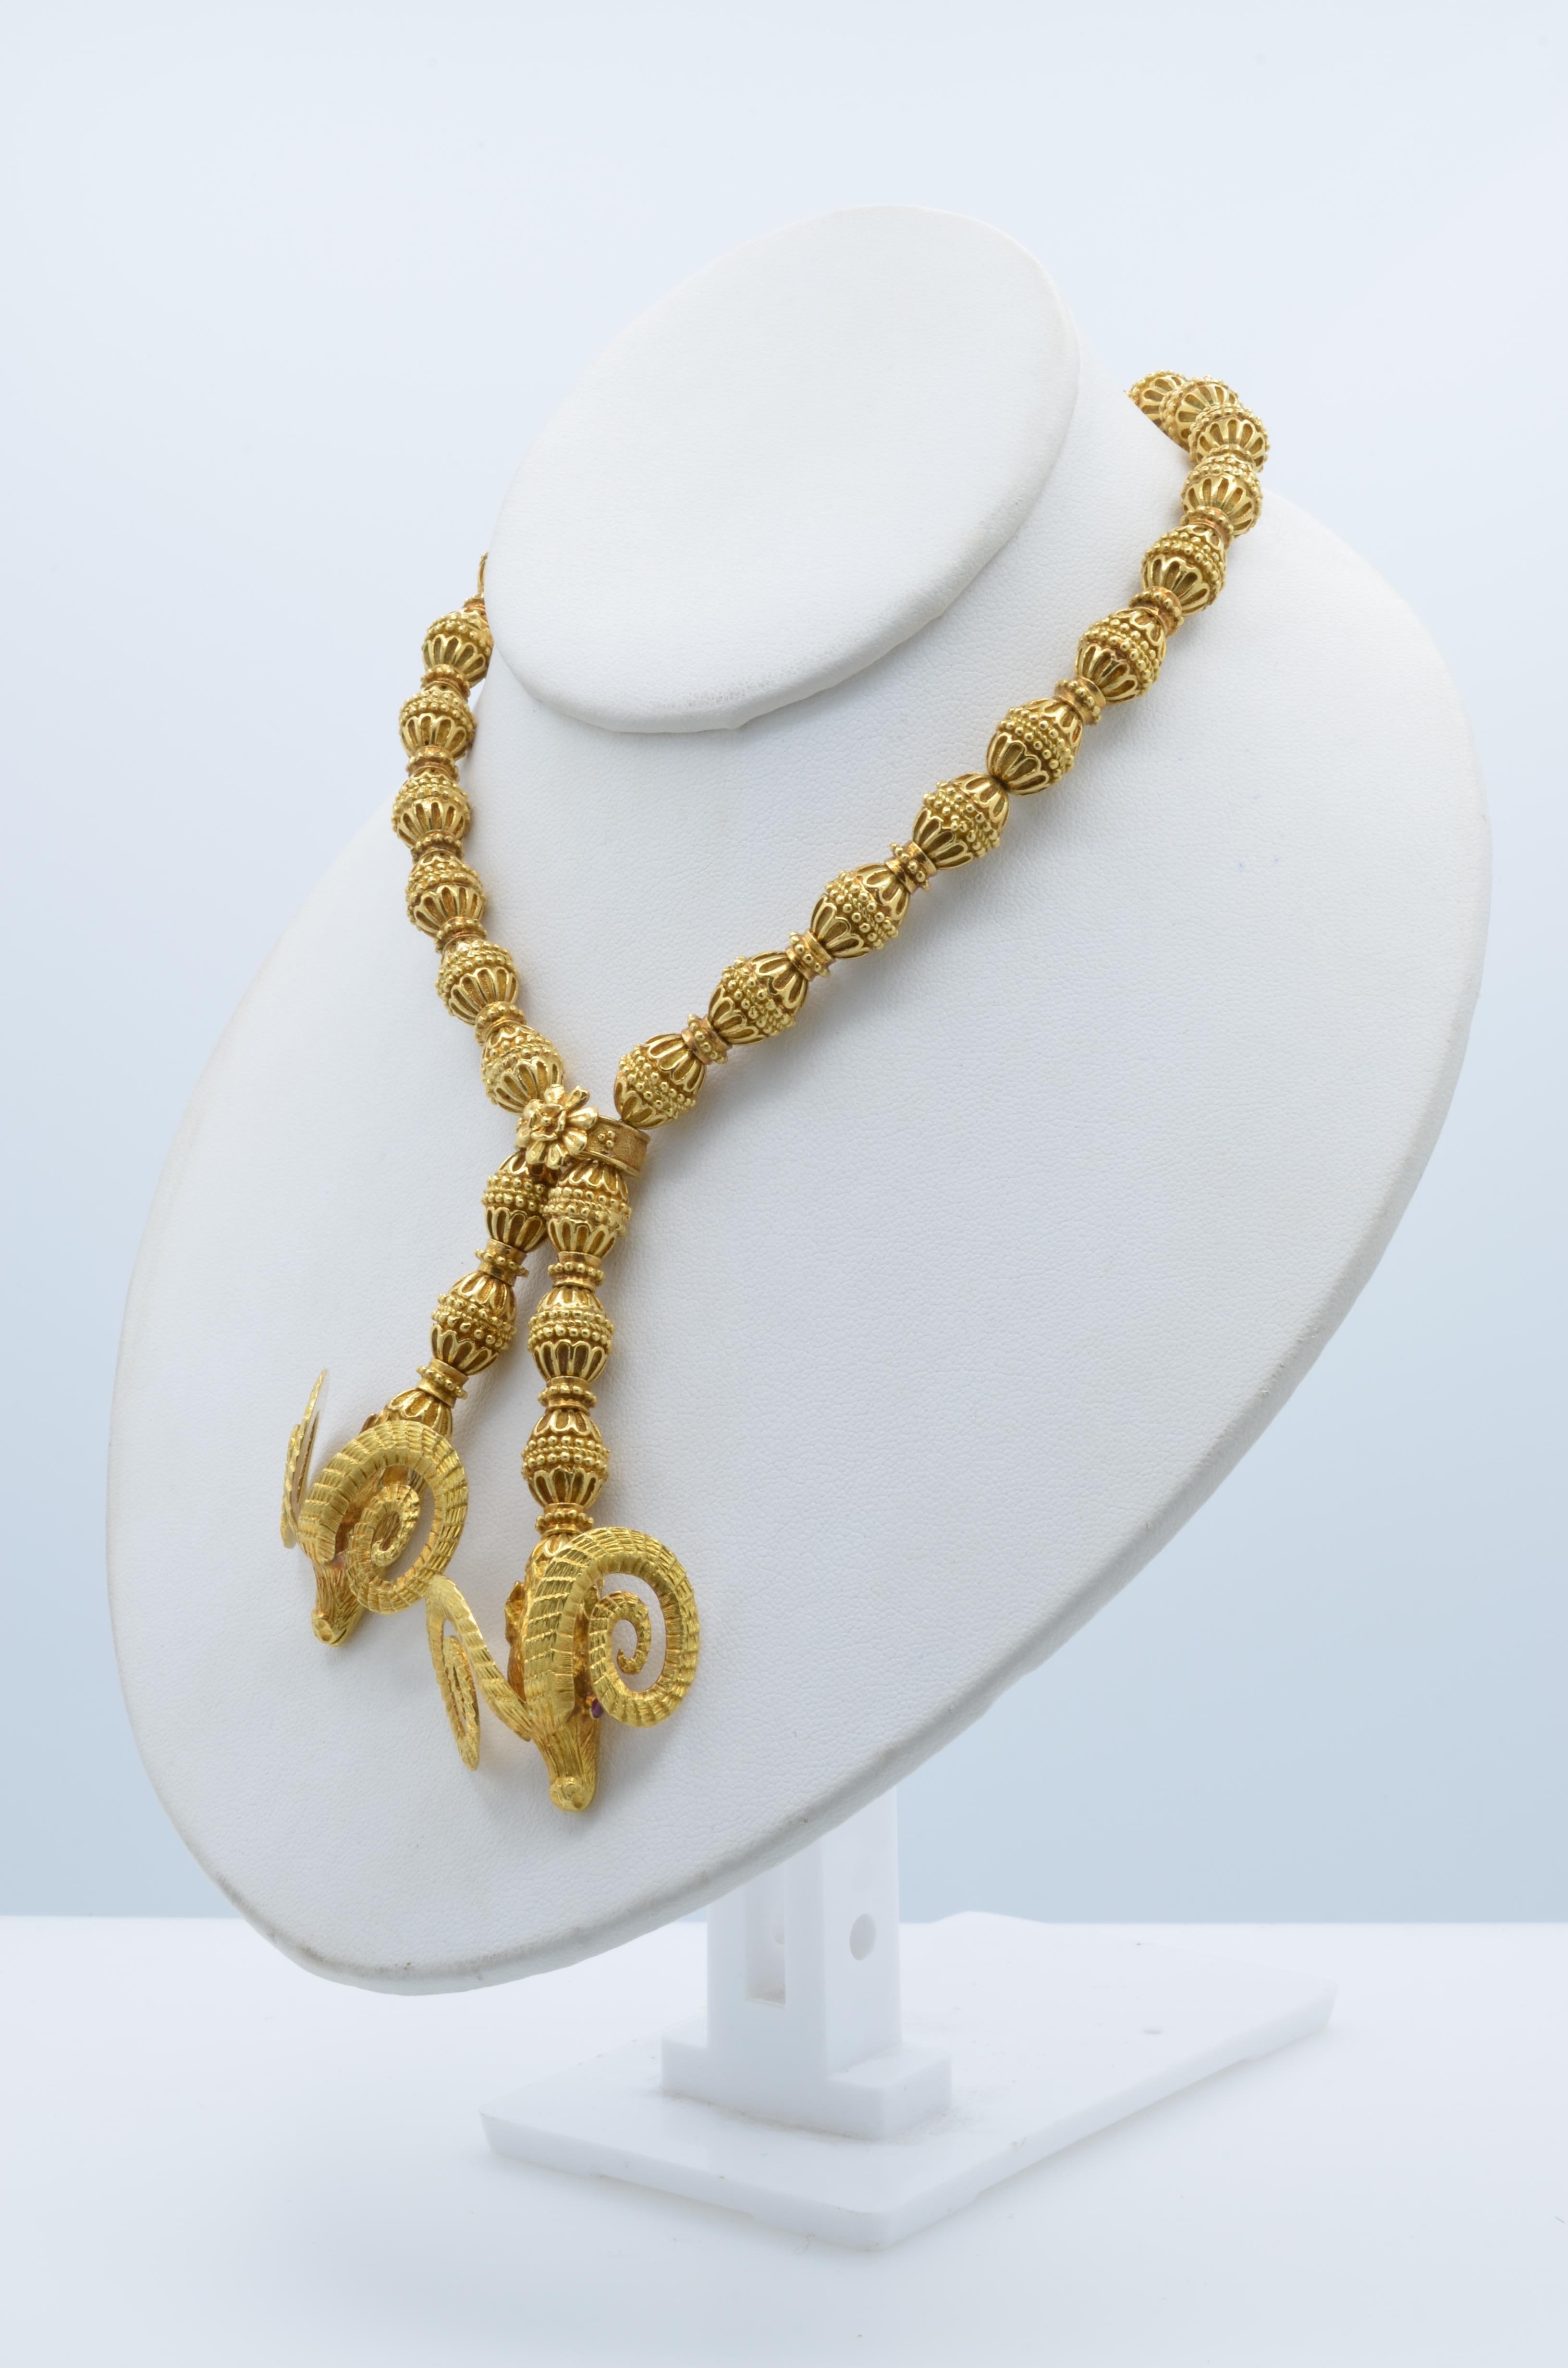 Lalaounis Two Horn Ram Head Gold Bead Necklace in Gold 18 Karat with Ruby Eyes 4